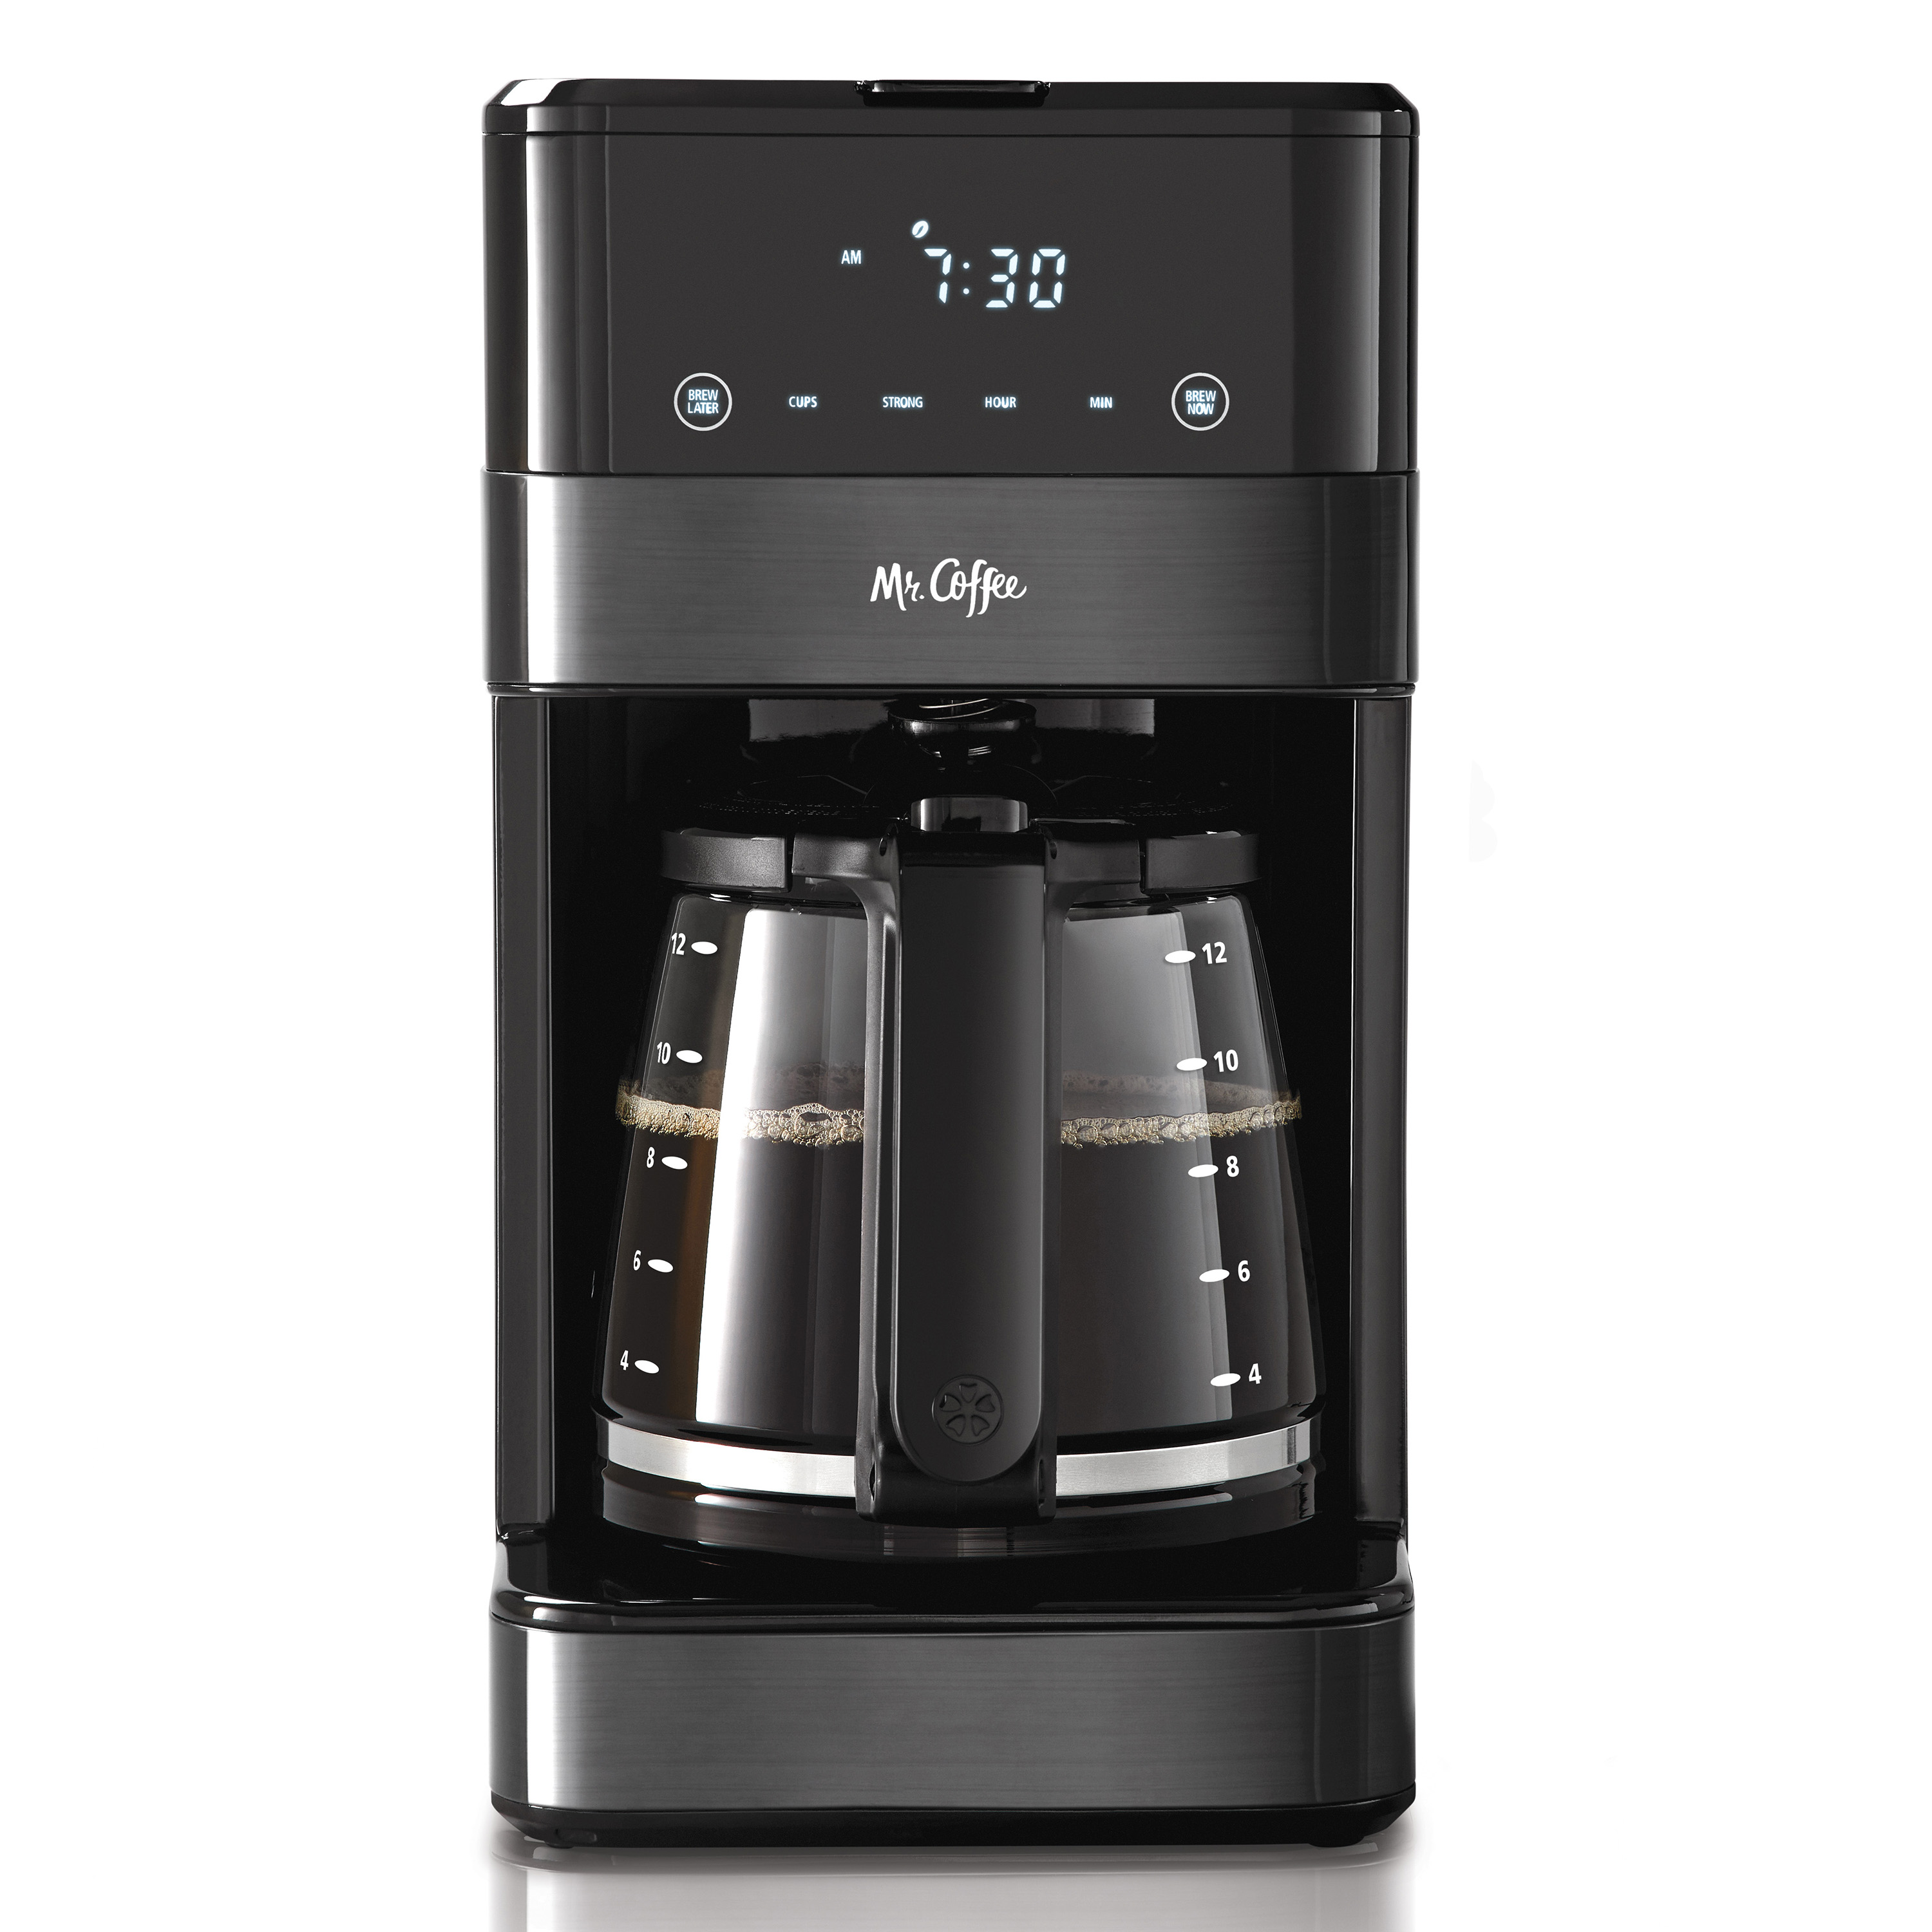 Mr. Coffee 12 Cup Programmable Coffee Maker, LED Touch Display, Black Stainless - image 1 of 9